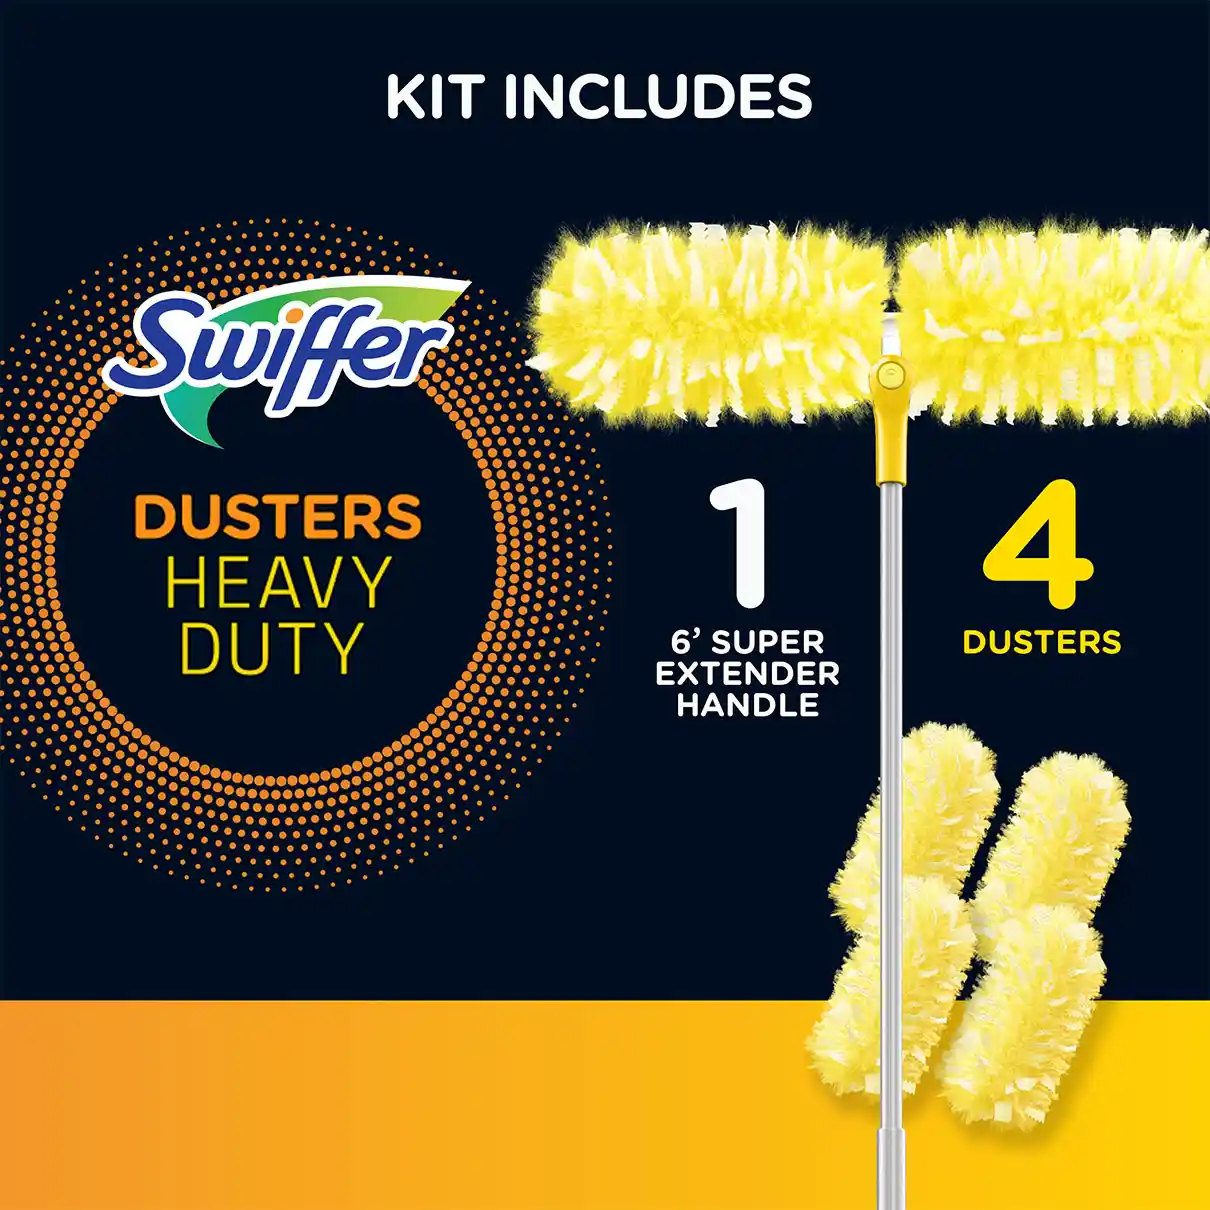 6 In 1 House Cleaning Kit With Extension Pole Broom Cobweb Duster Window  Squeege